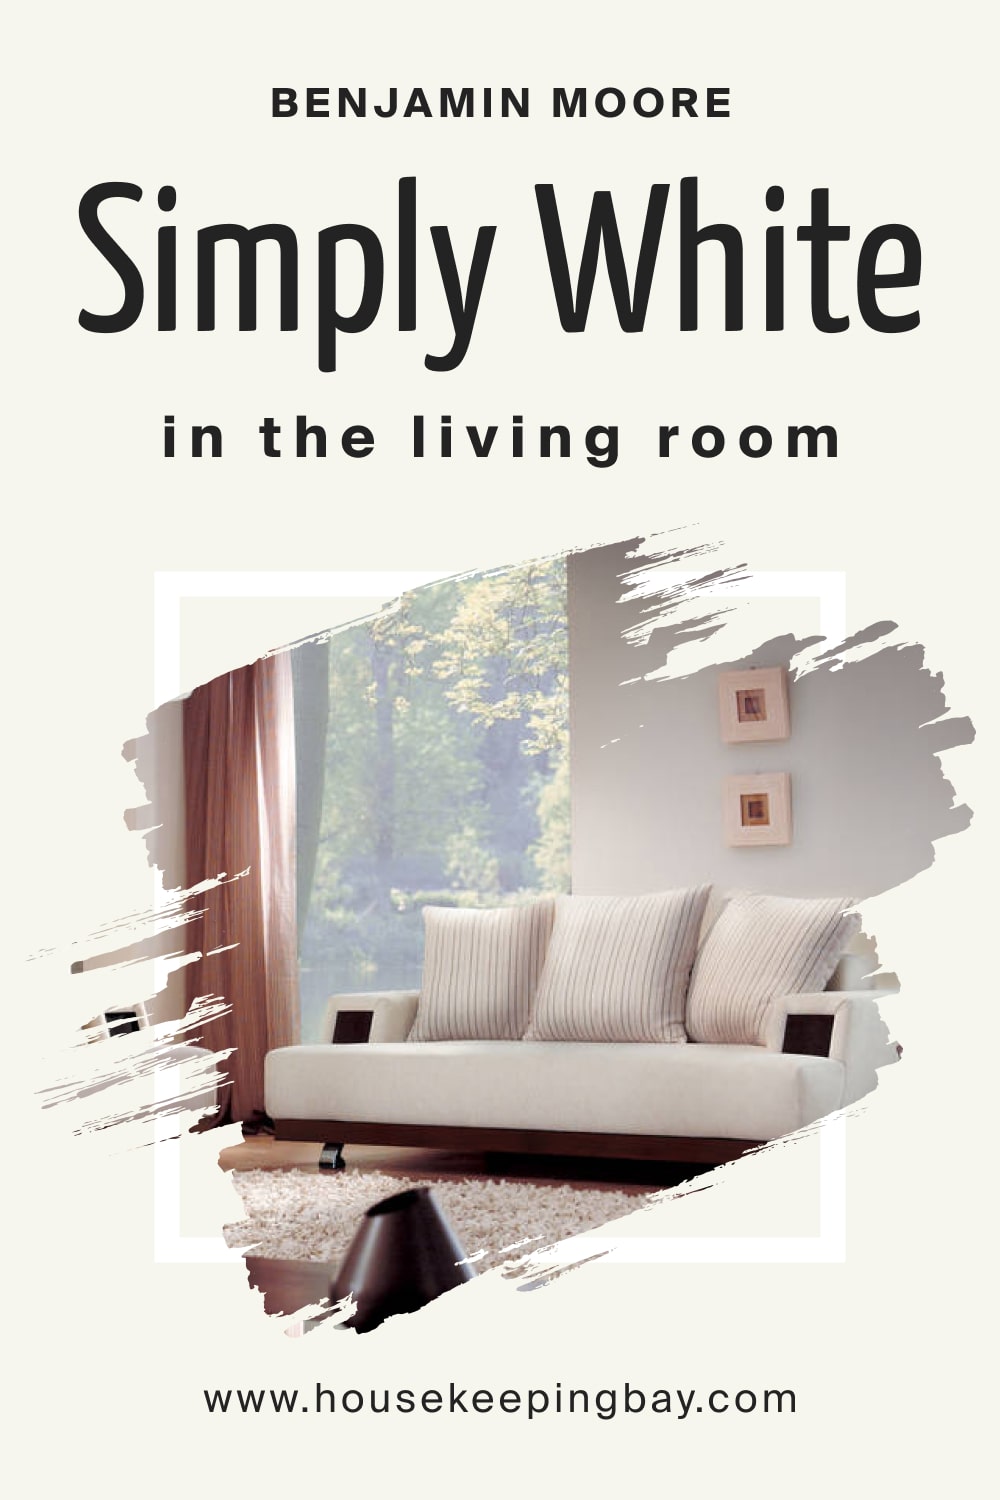 Benjamin Moore. Simply White OC 117 in the Living Room